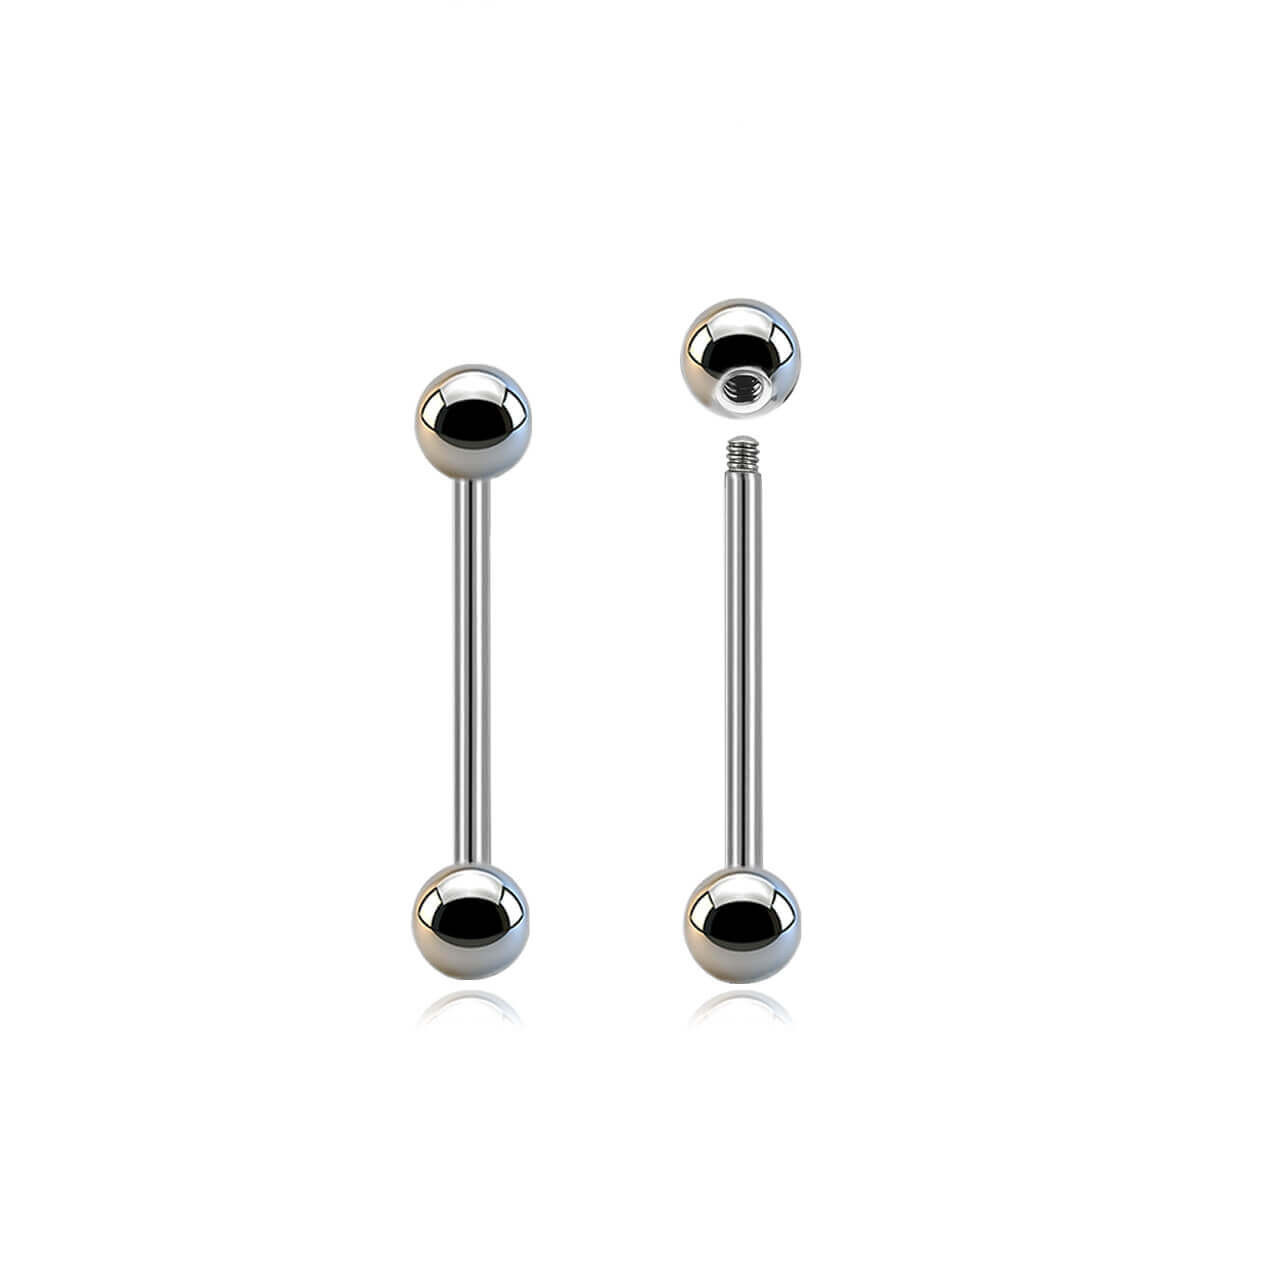 SBA16B5 Wholesale Lot of 25 surgical steel tongue barbells, Thickness 1.6mm, Ball size 5mm